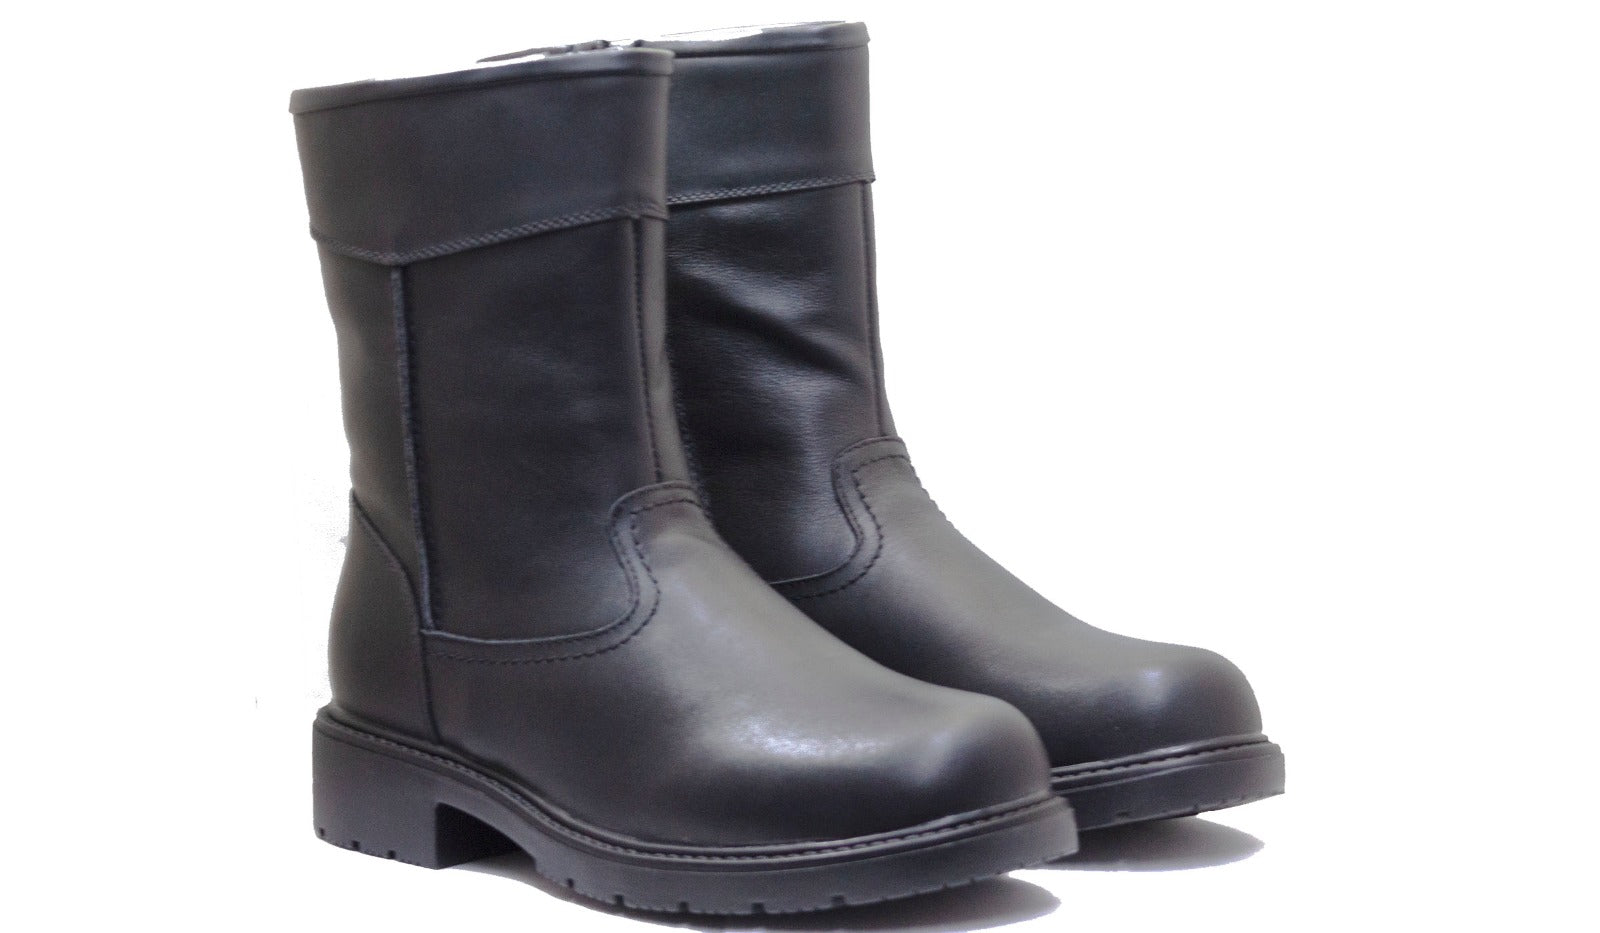 Santana Canada's Men's Kevin Waterproof Leather Fur Lined Winter Boots